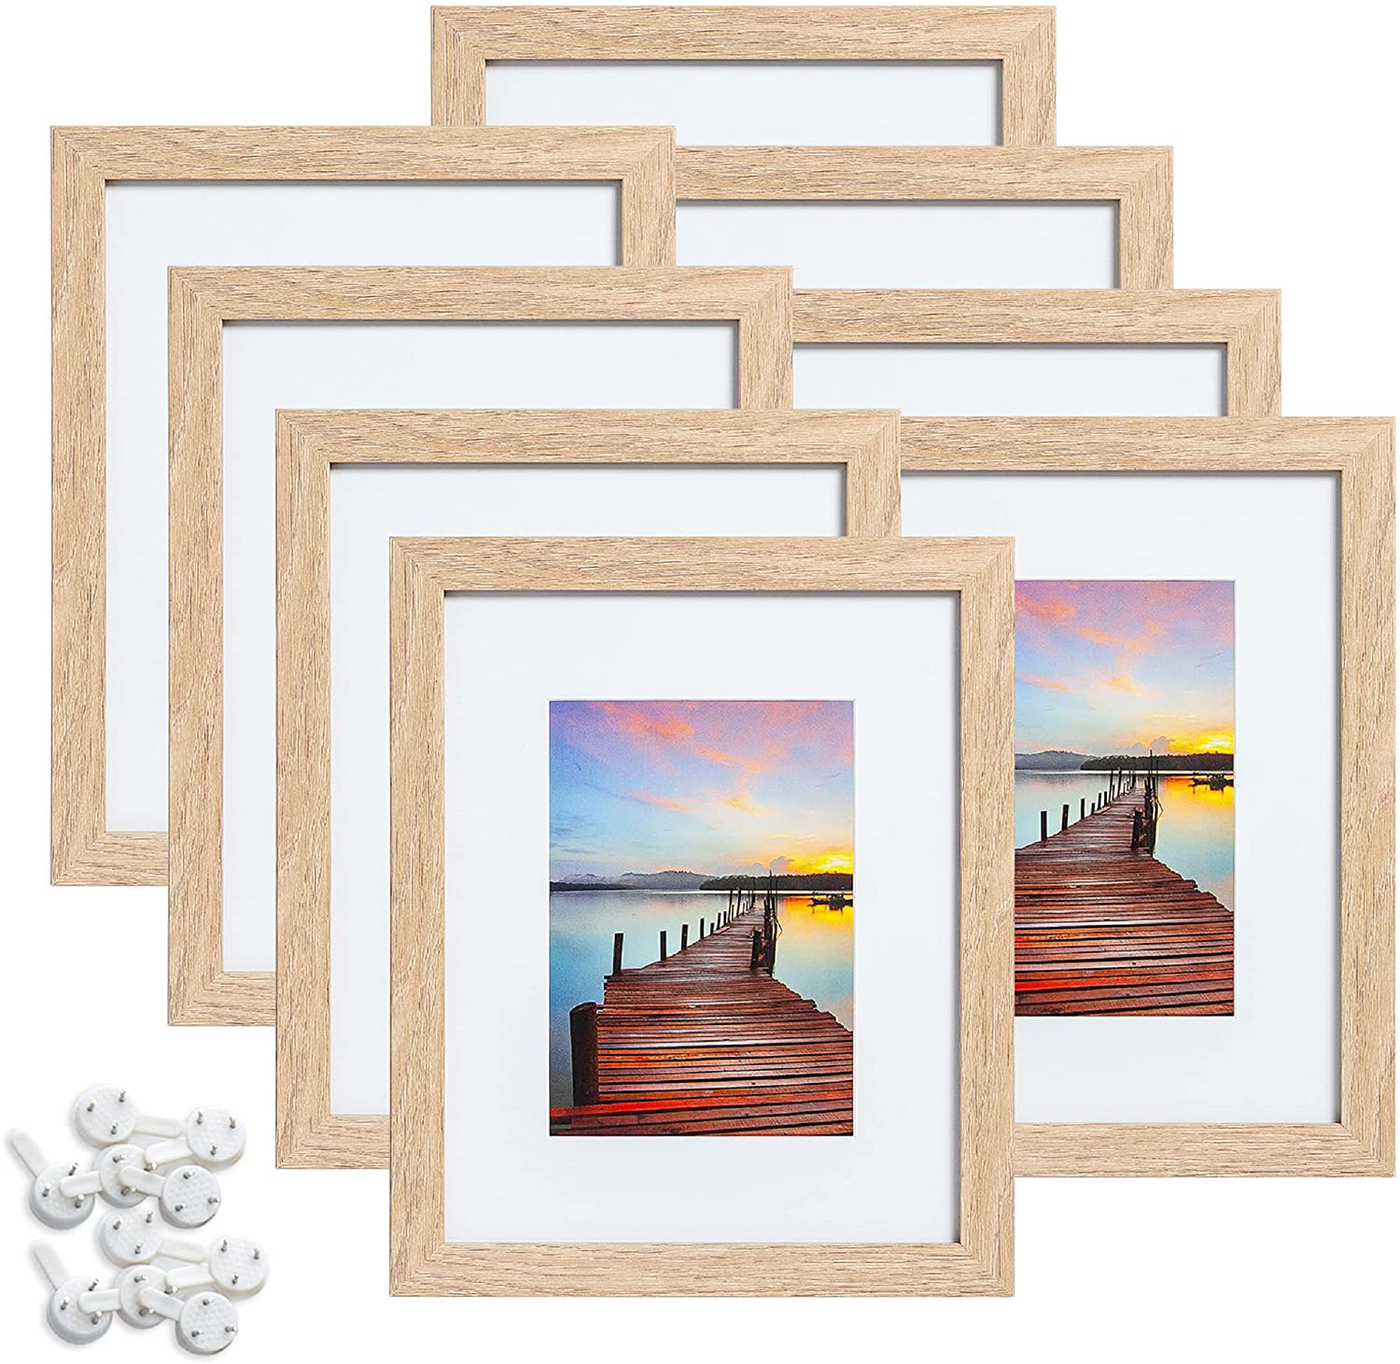 Sindcom 8x10 Picture Frame, Black Wood Textured Photo Frames Collage, Display Photos 5x7 with Mat or 8x10 Without Mat, Mounting Hardware Included, for Wall or Tabletop Display, Set of 8